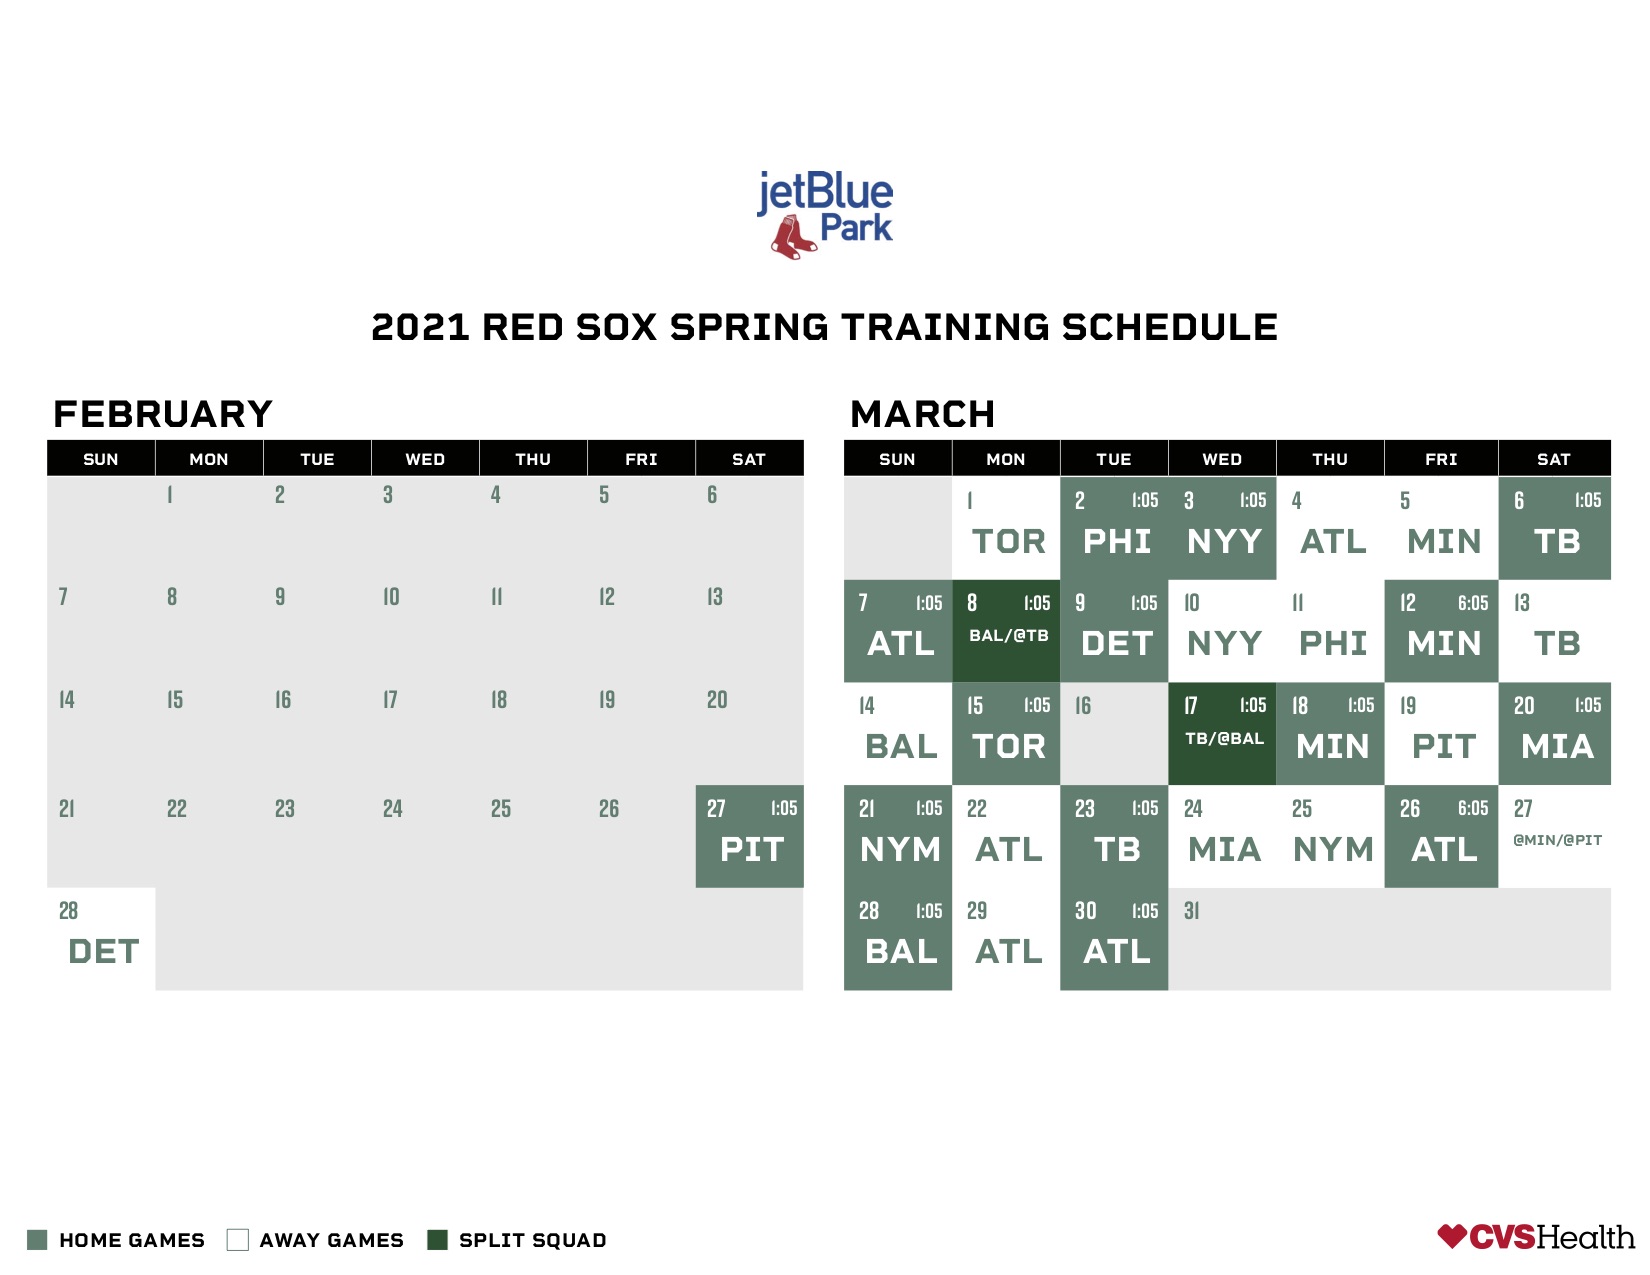 Red Sox announce that a restricted spring training will begin Feb. 17